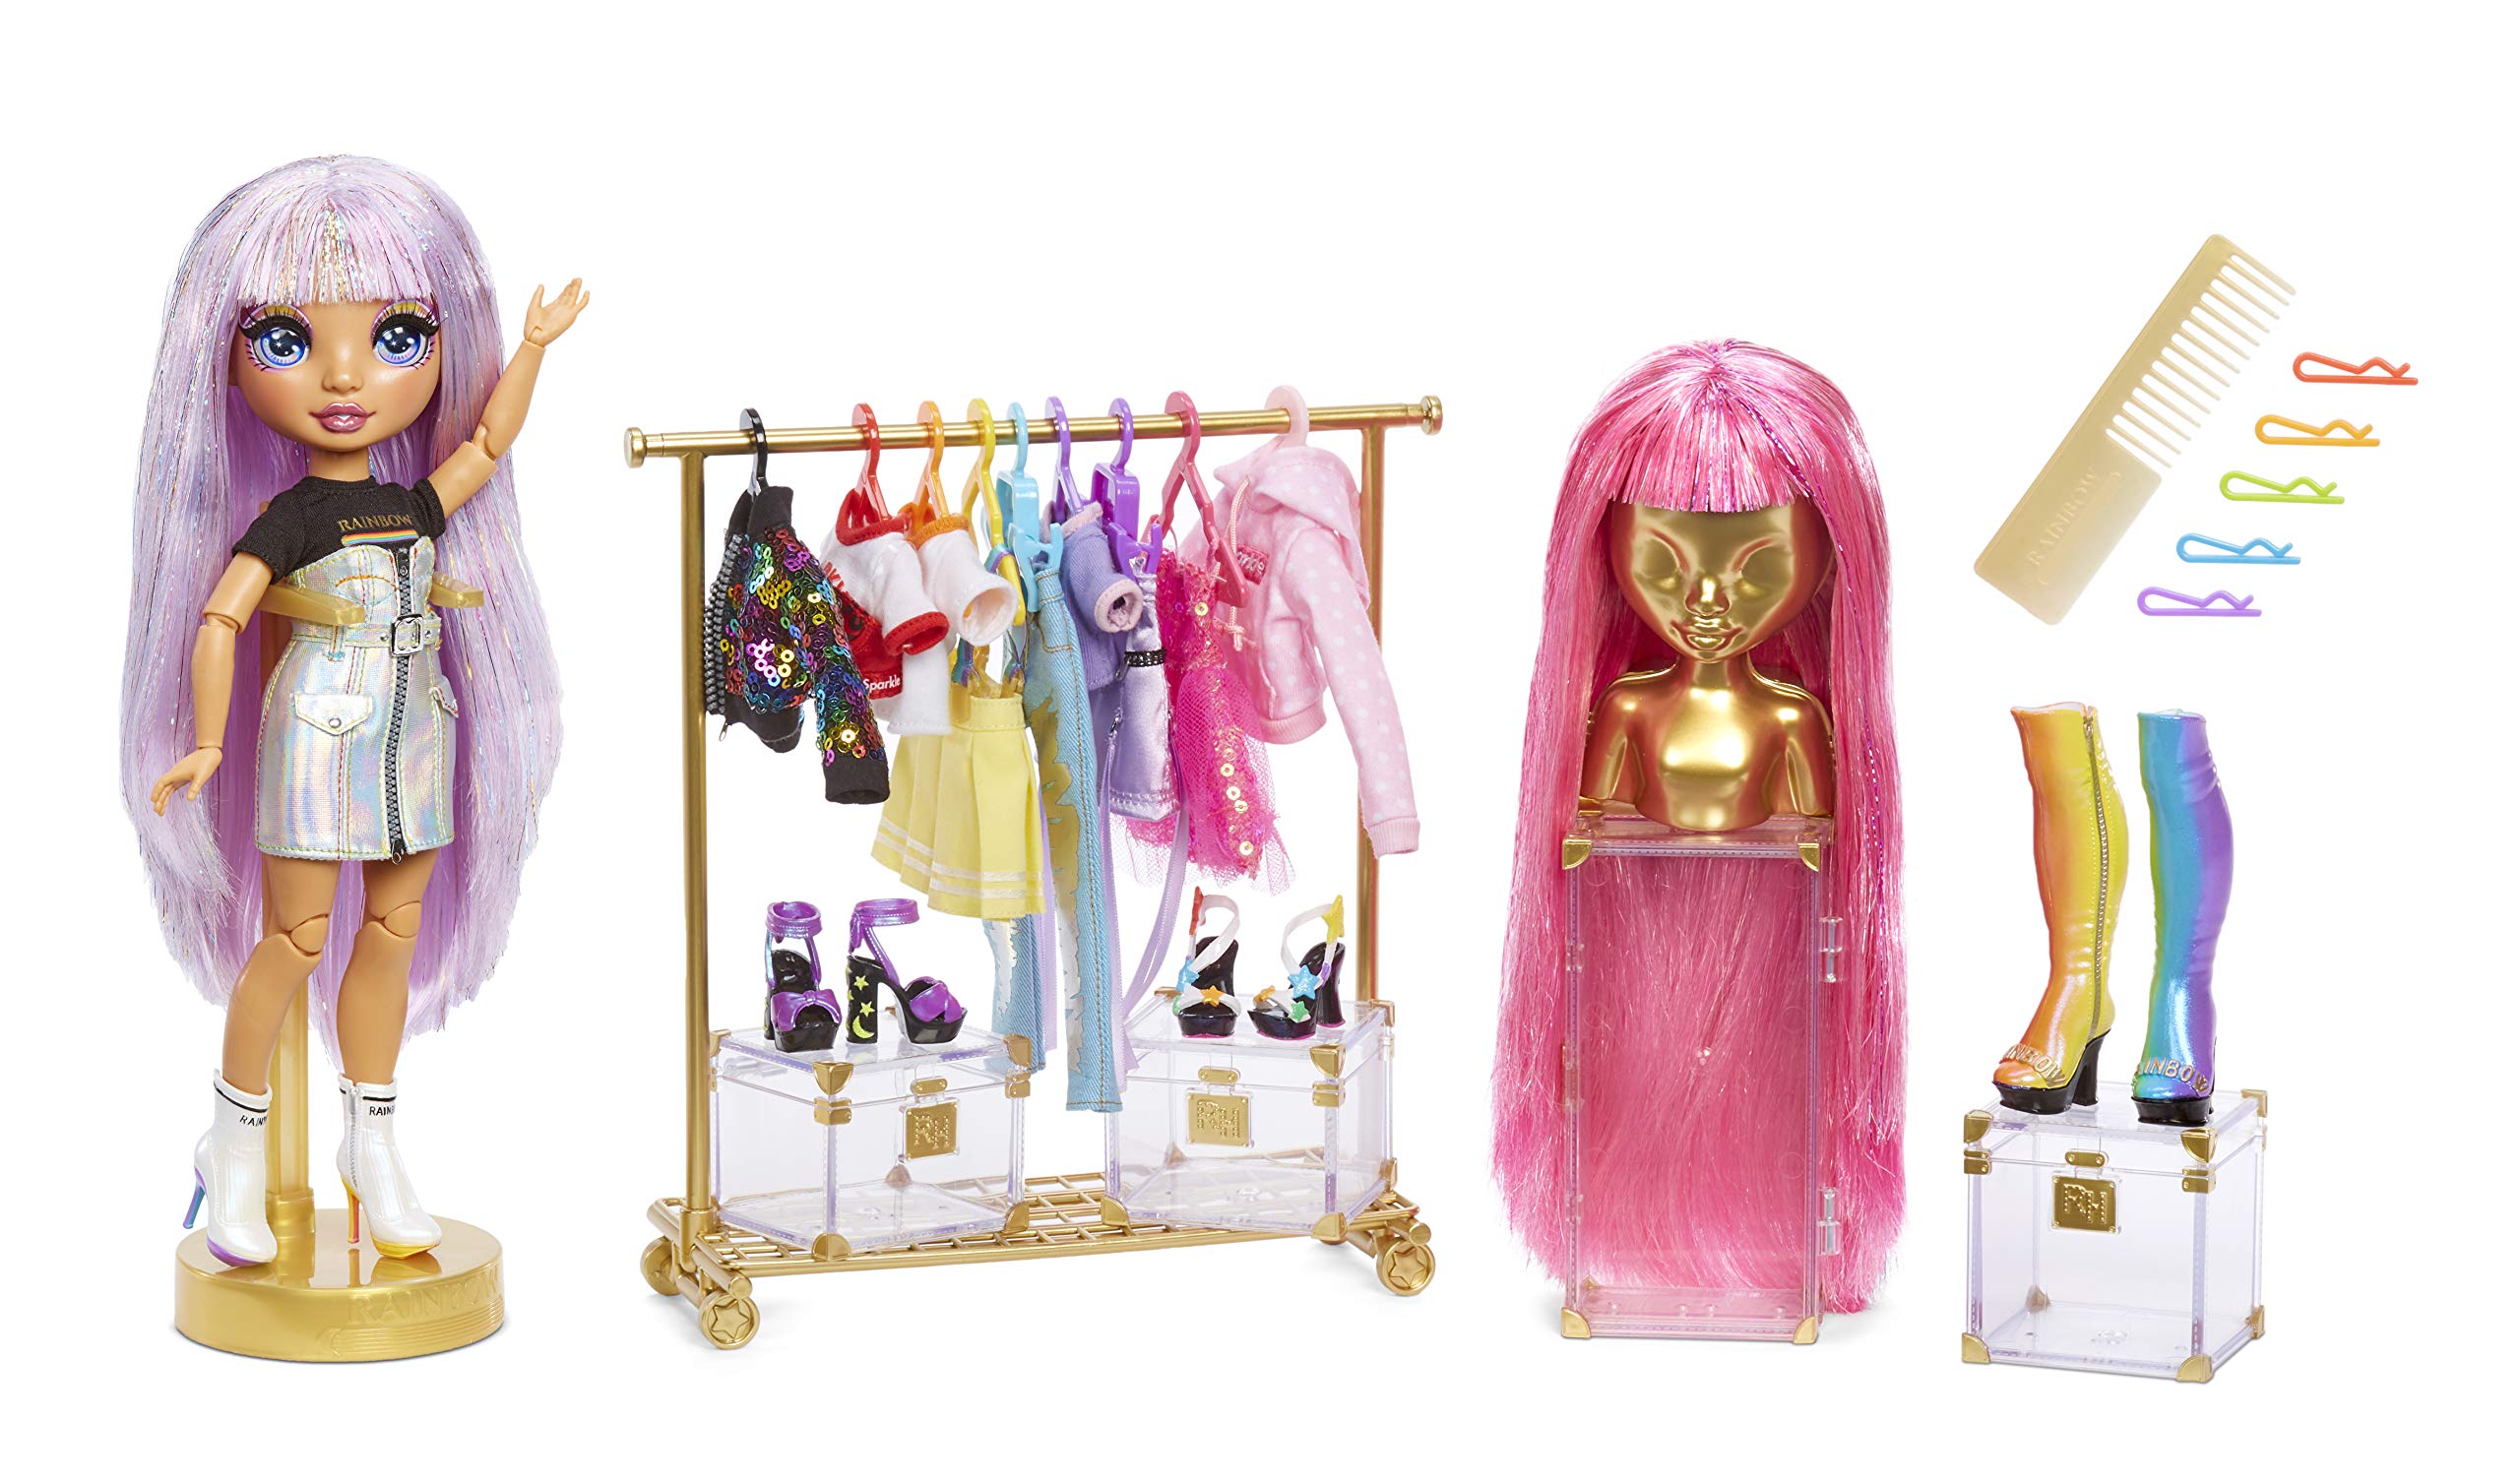 Rainbow High Fashion Studio with Avery Styles Fashion Doll Playset Includes Designer Outfits & 2 Sparkly Wigs for 300+ Looks, Gifts for Kids & Collectors, Toys for Kids Ages 6 7 8+ to 12 Years Old